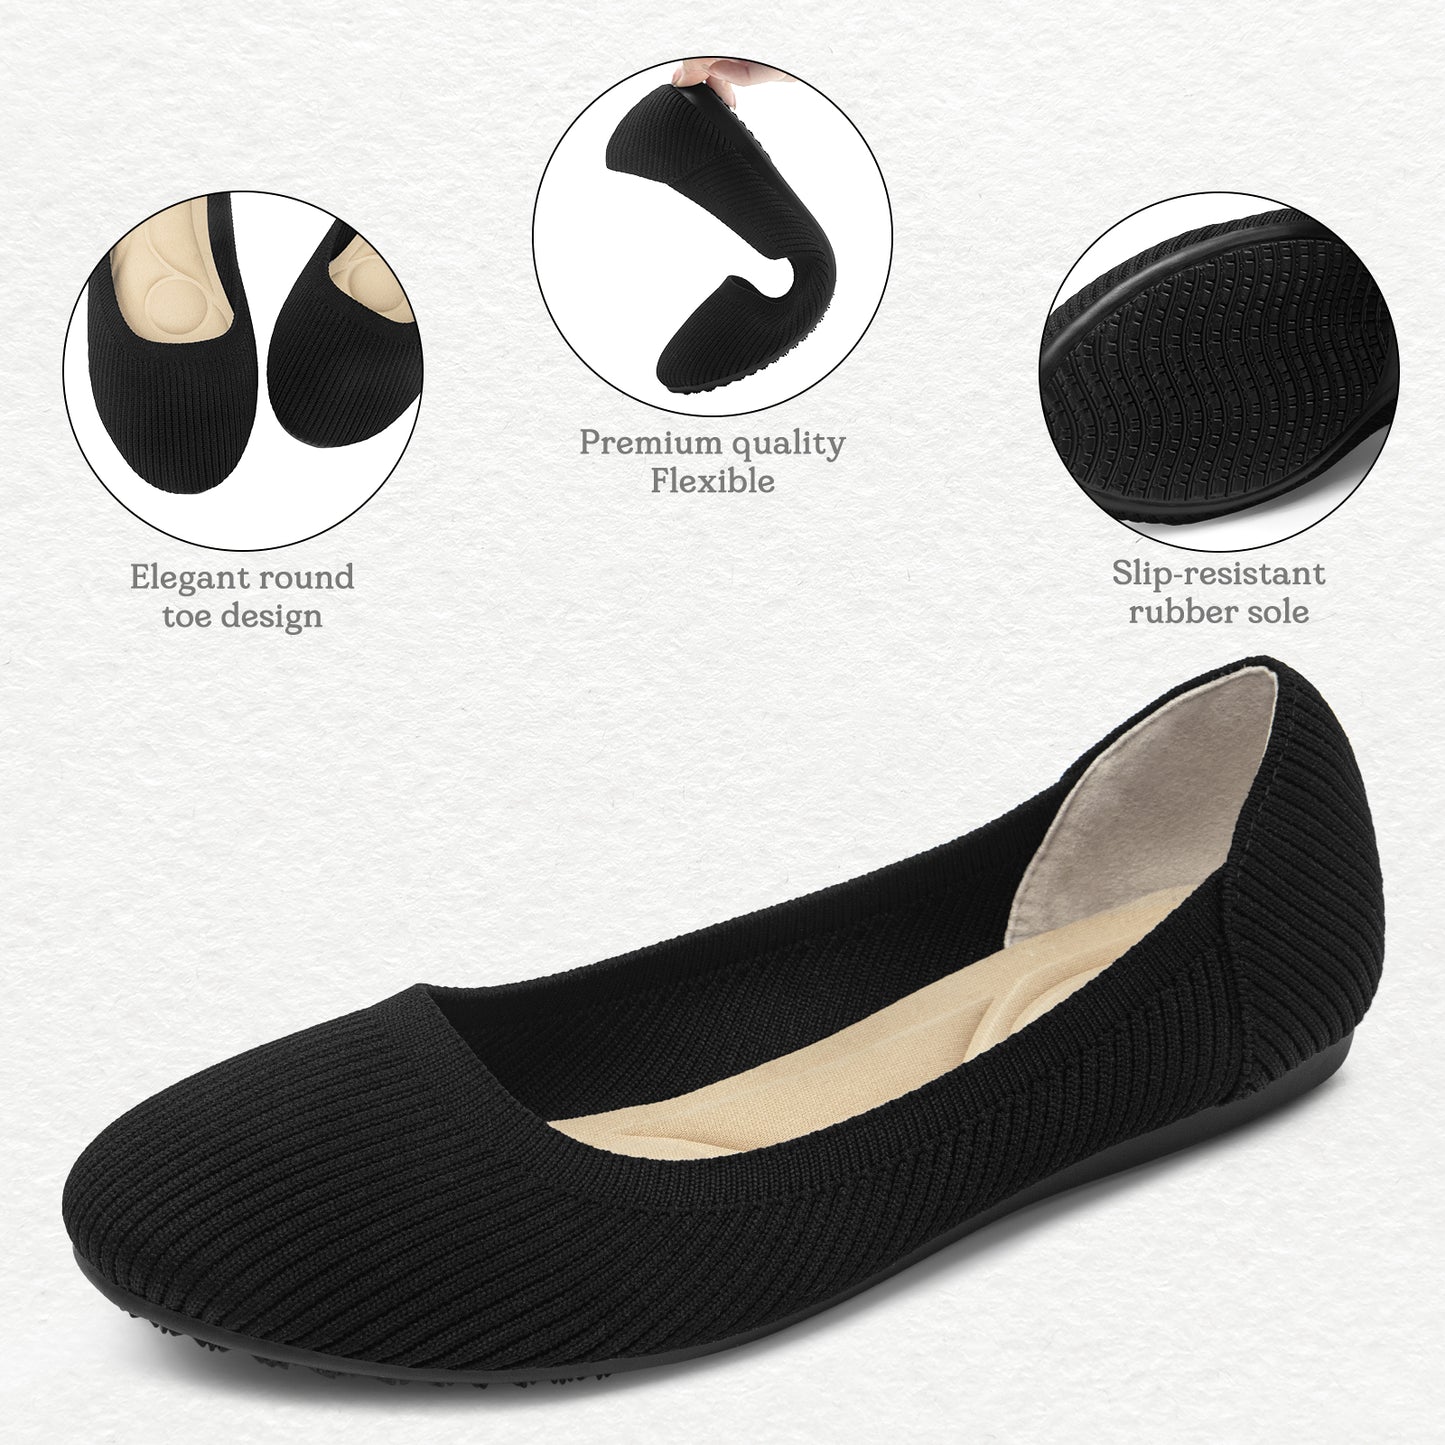 AEDAMURRA Black Flats for Women, Round Toe Ballet Flats Shoes with Arch Support, Washable Comfortable Knit Flats for Women Dressy Wedding Work Office Casual